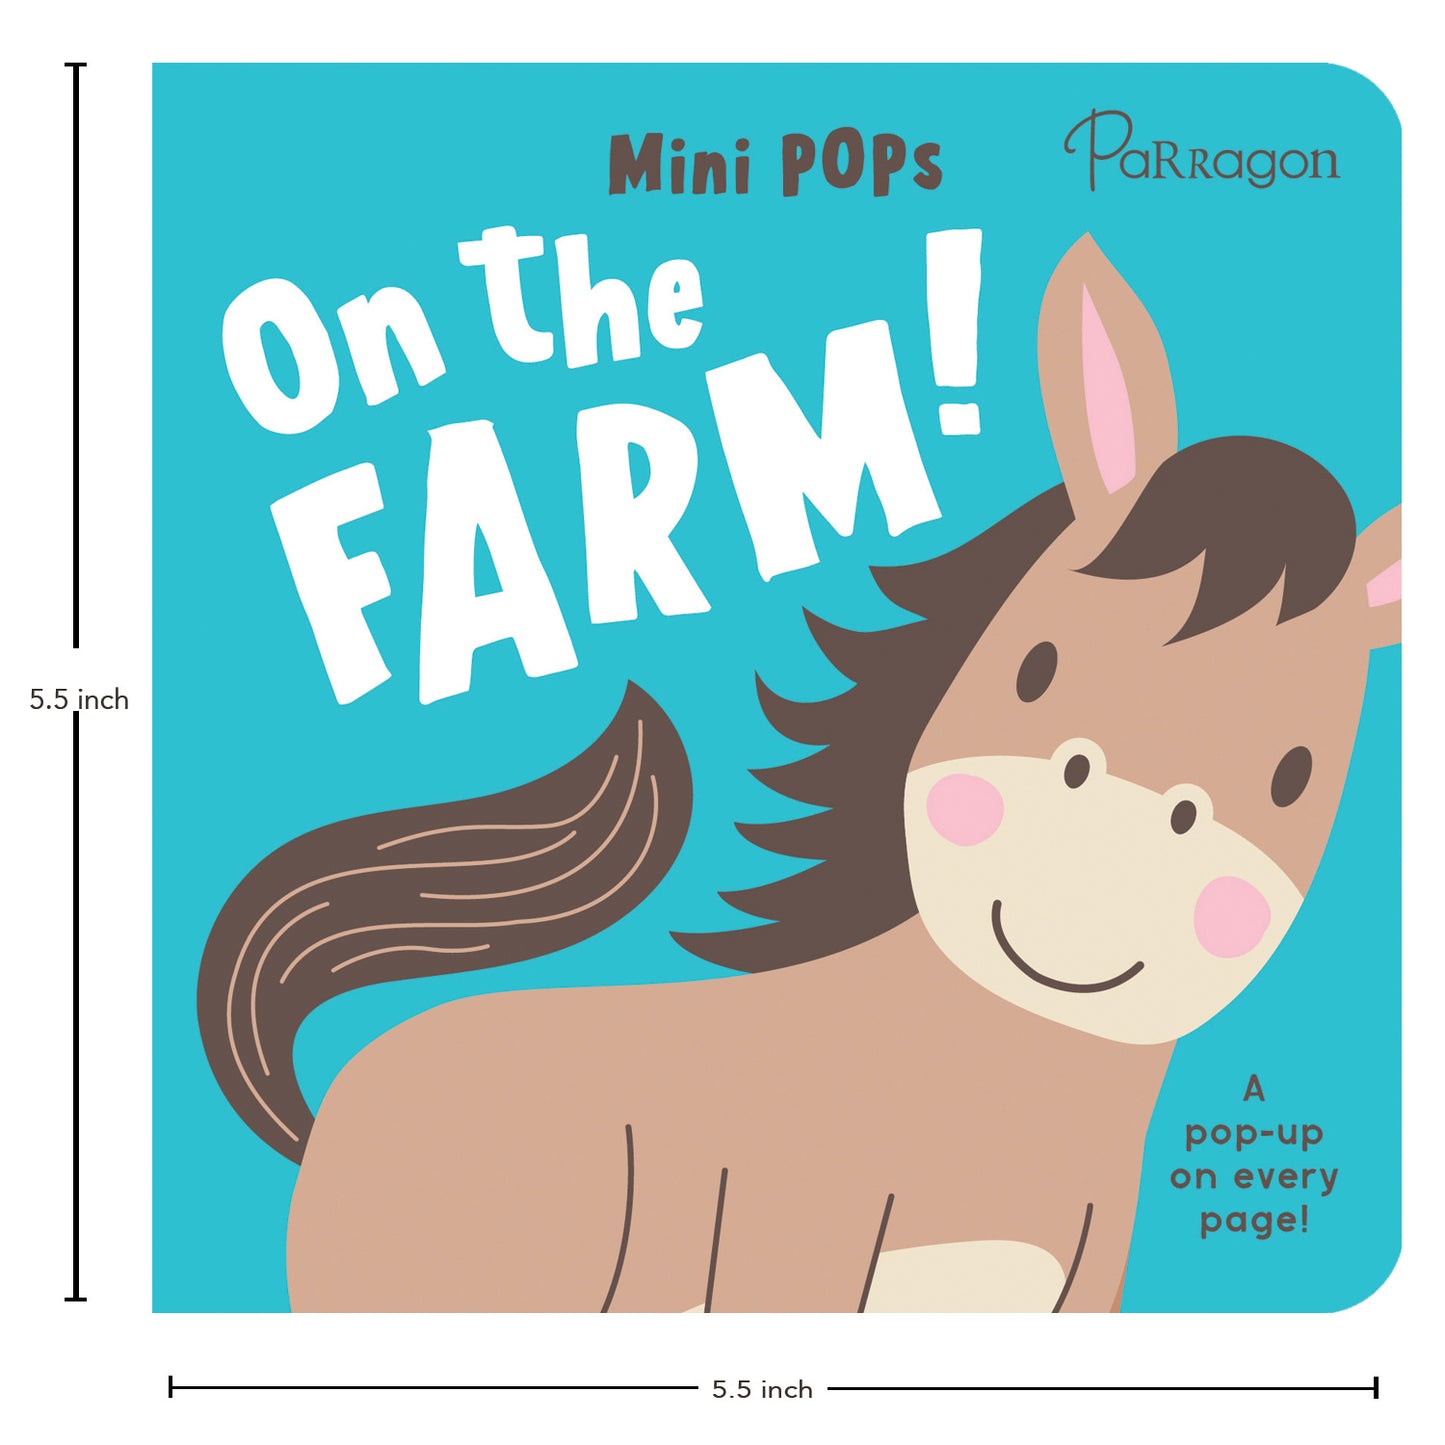 Mini Pops‐ On the Farm (Pop-up book) | For Kids 1 to 3 Year's Old